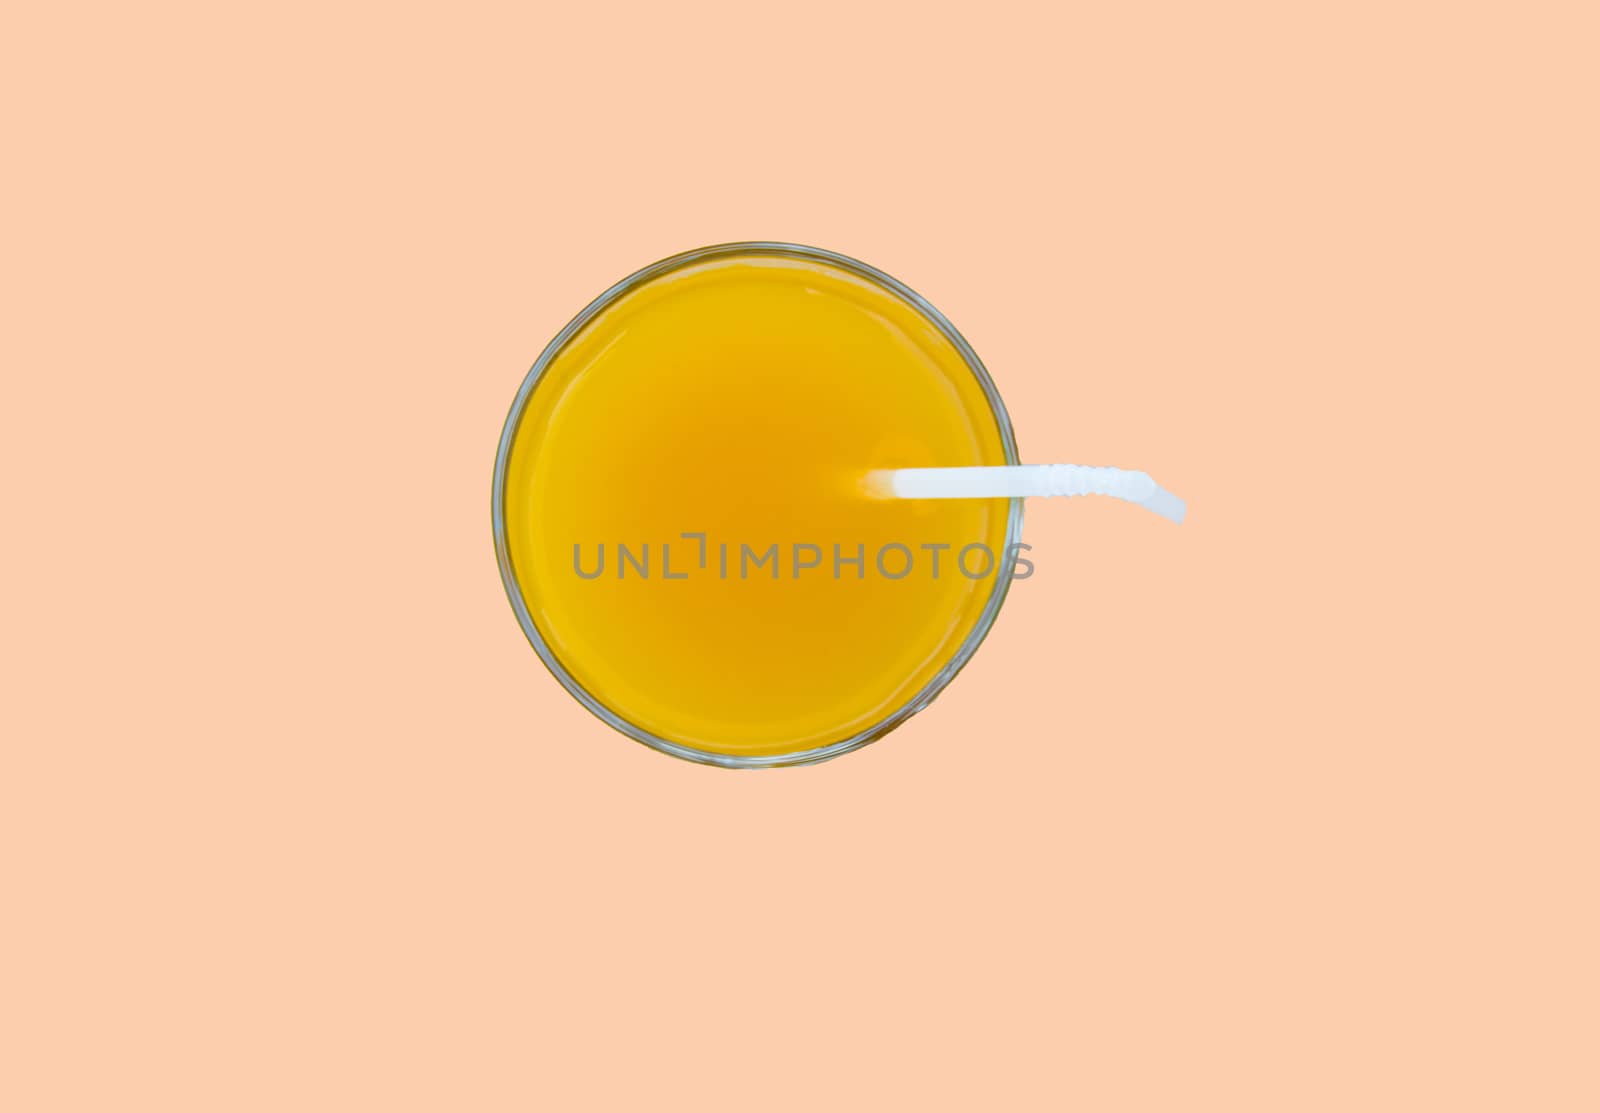 Summer drink - freshly squeezed orange juice in a glass with a straw tube, top view, isolated on a pink background with clipping, minimalism style by claire_lucia